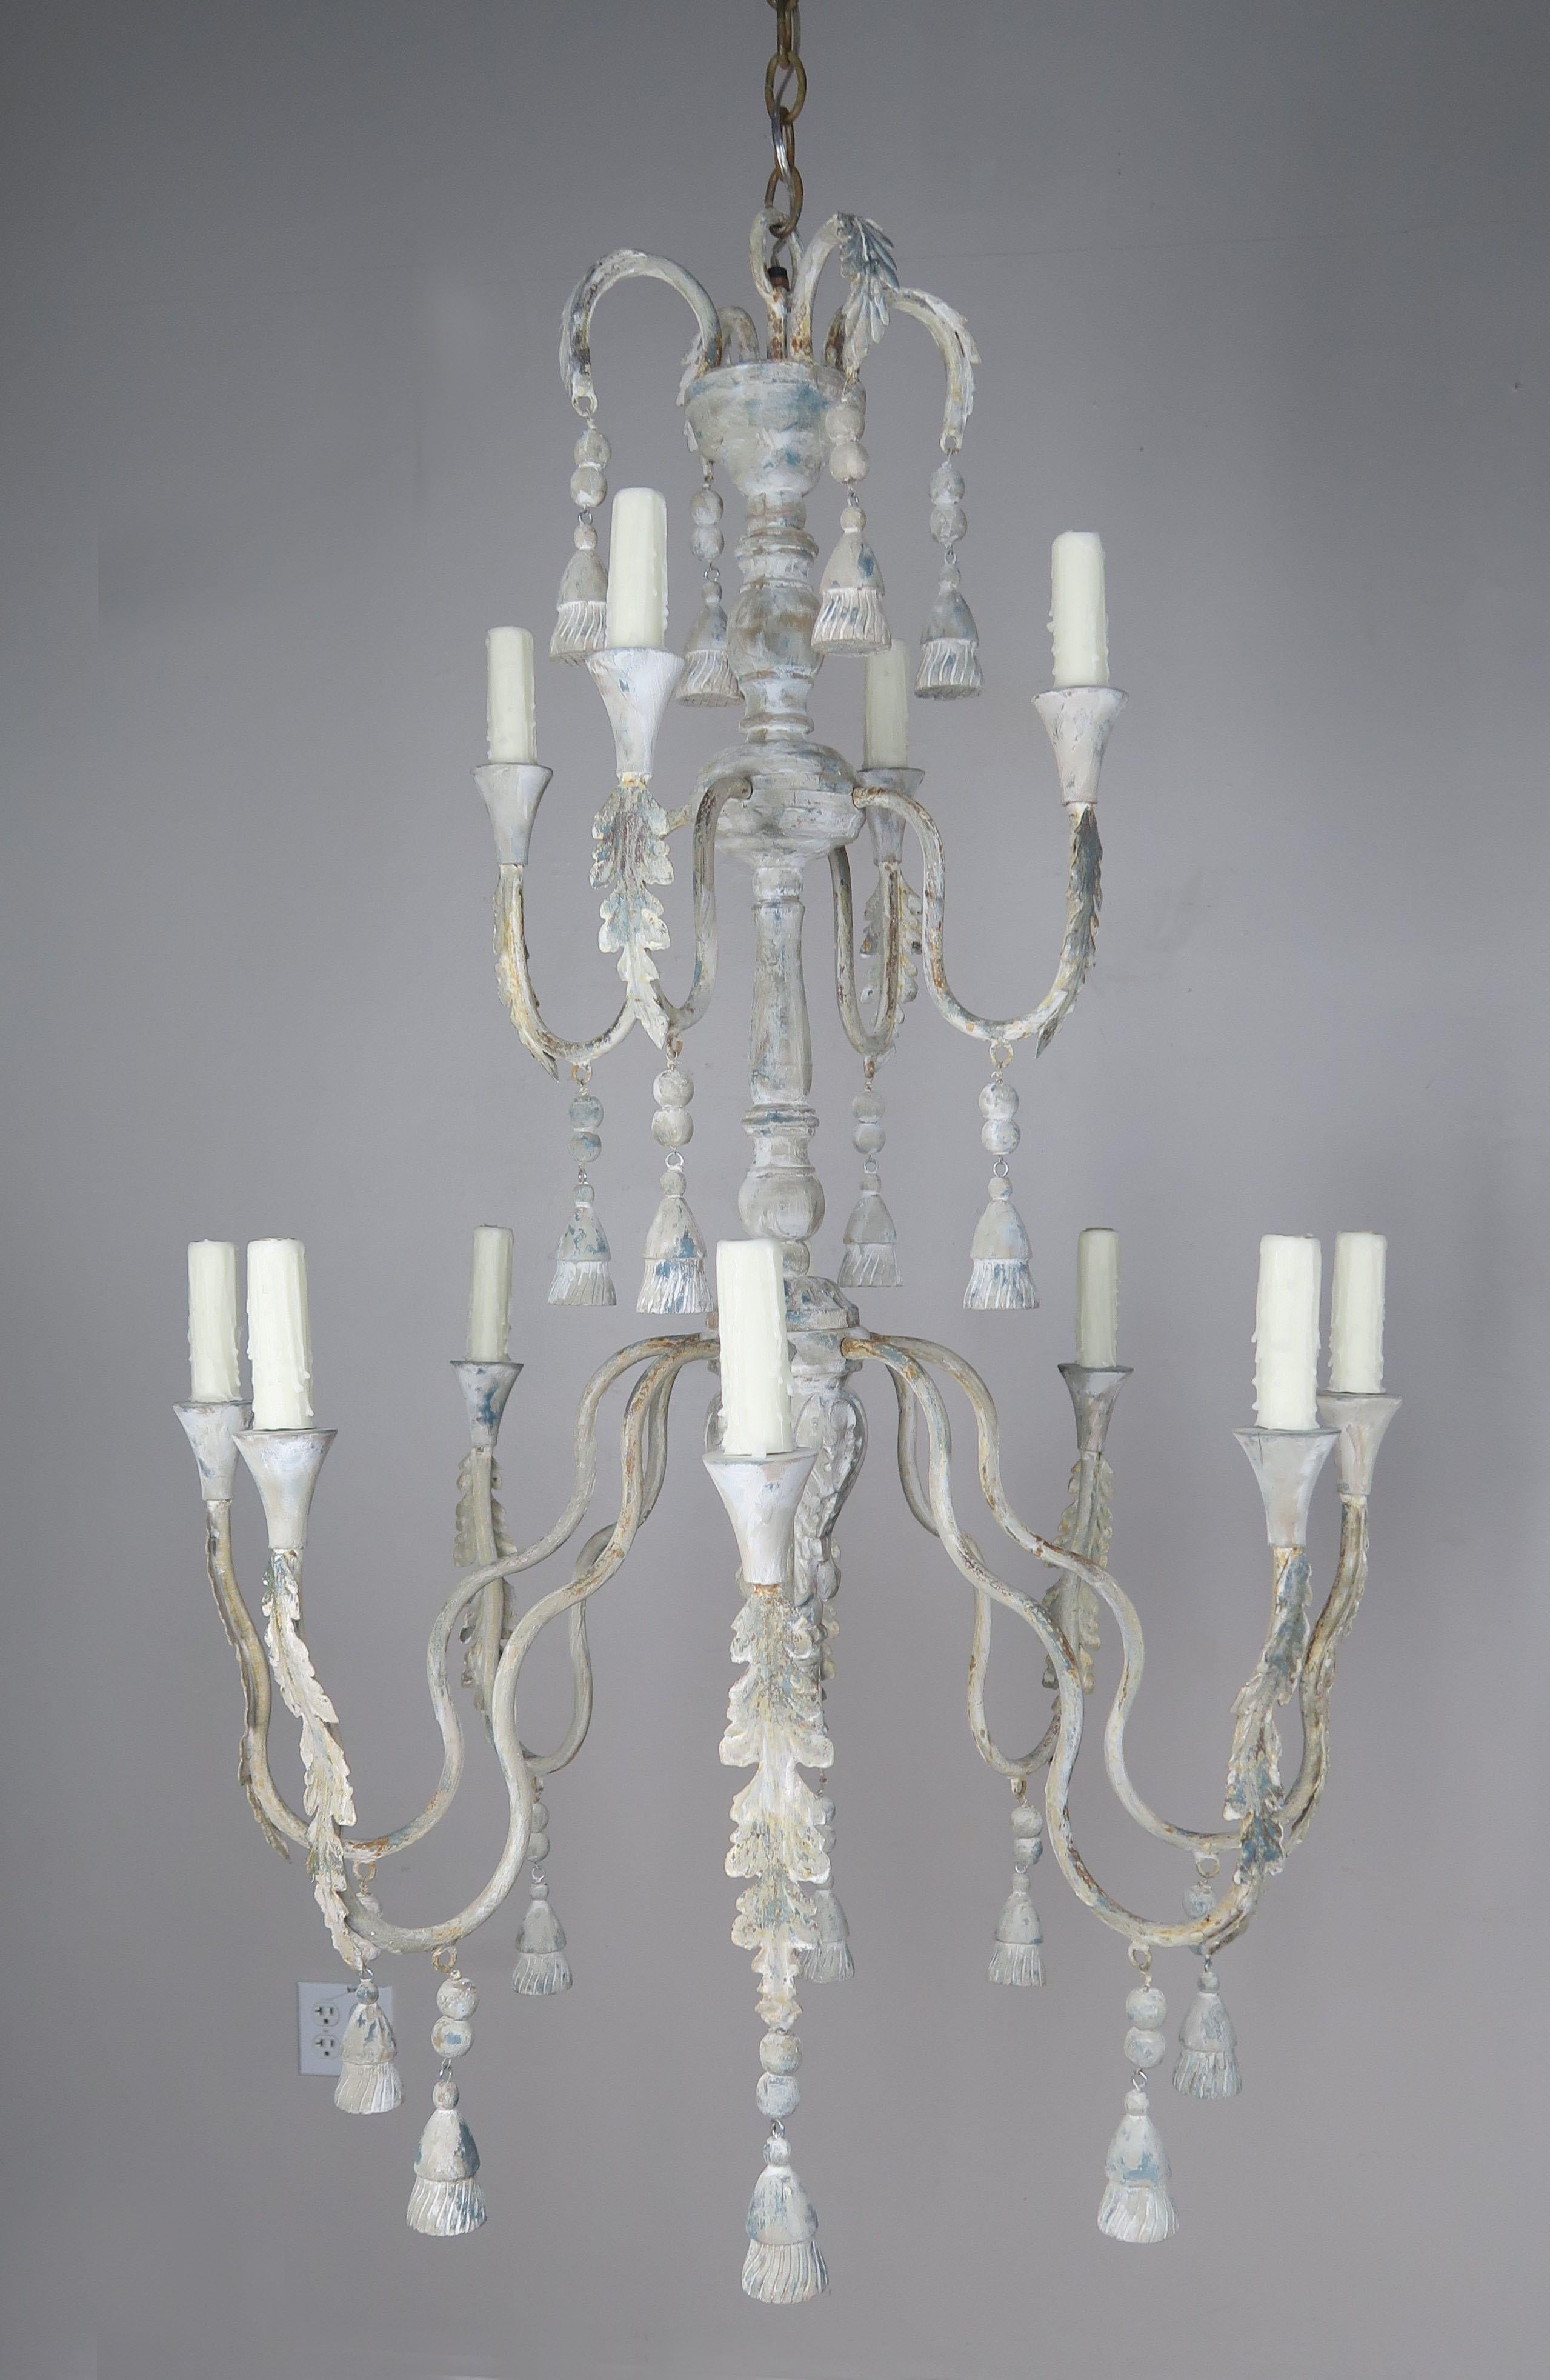 painted chandeliers